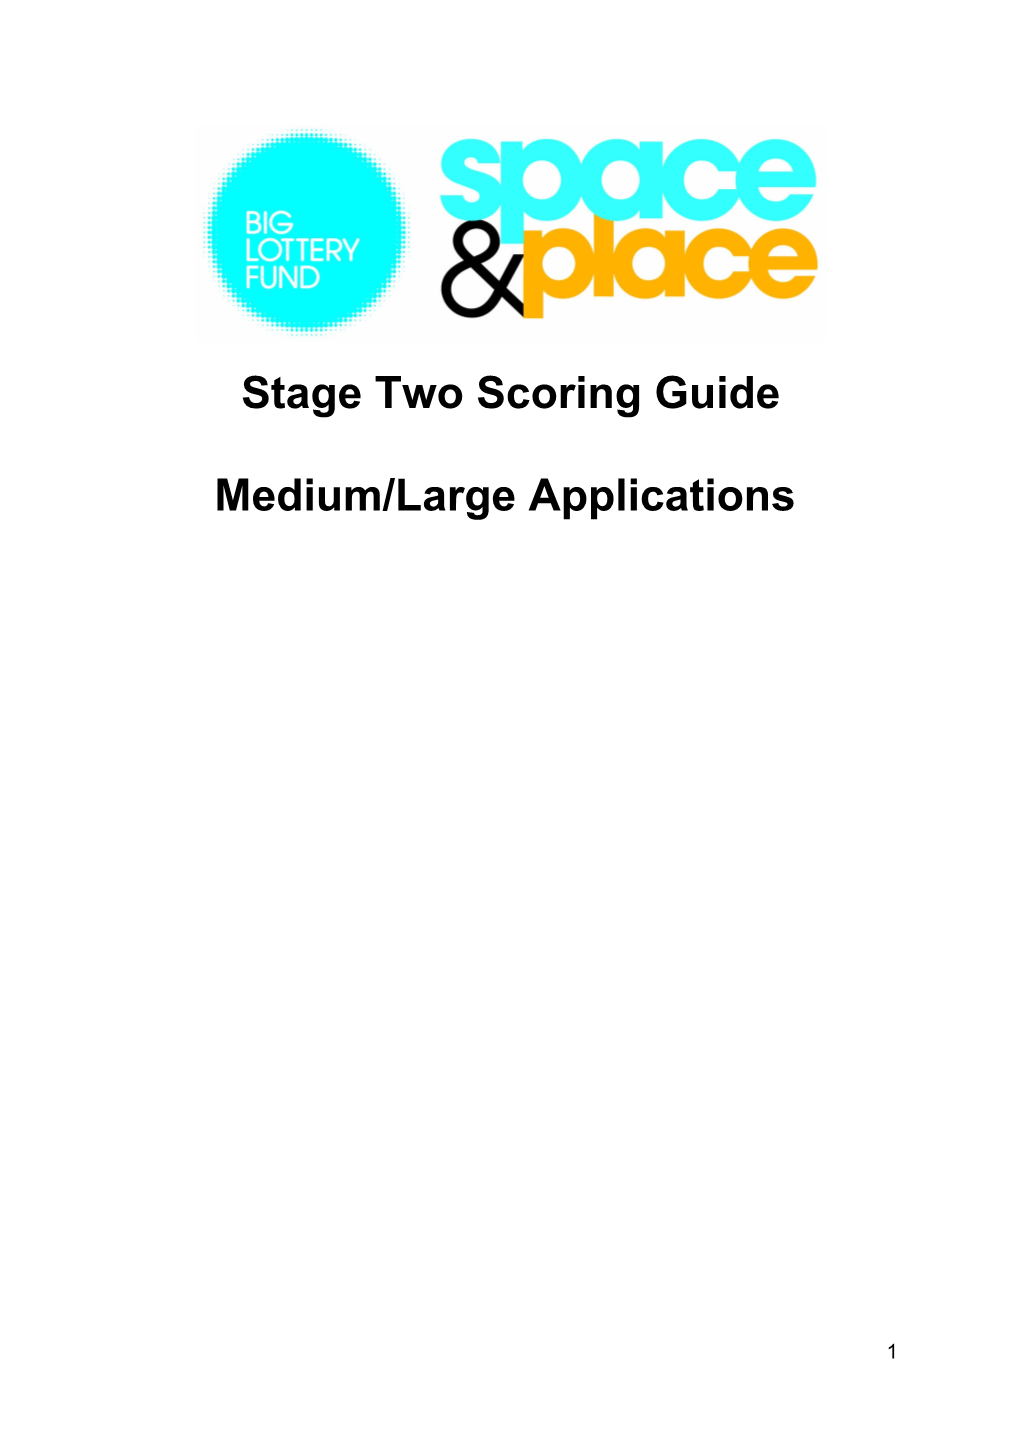 Stage Two Scoring Guide